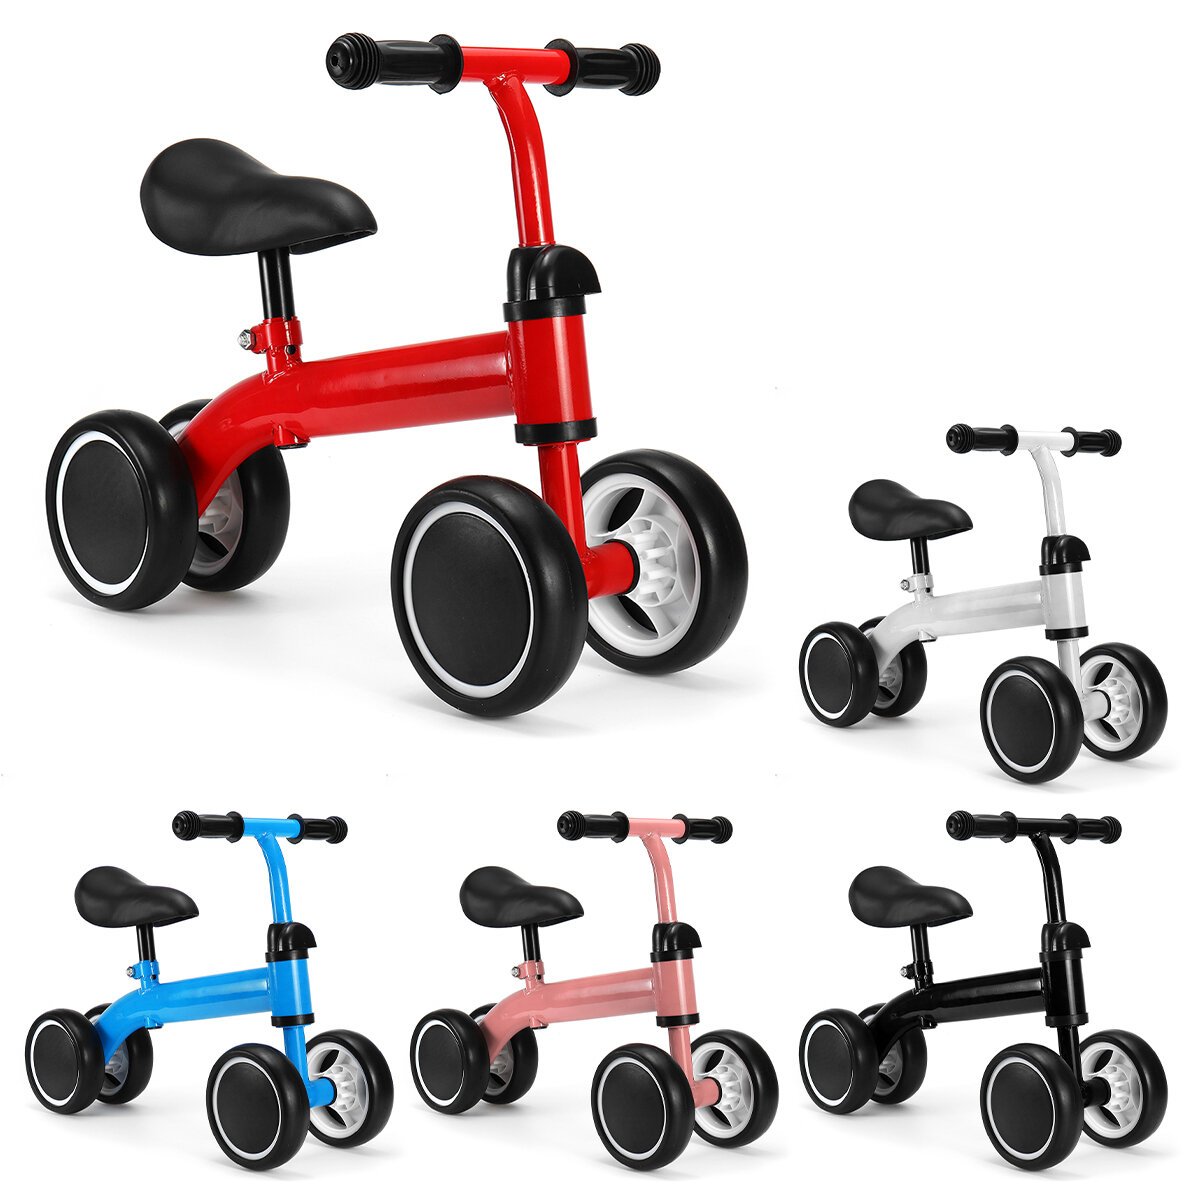 Novashion 4 Wheels No Pedal Baby Balance Bikes with Adjustable Seat&Handle for 1-4 Years Old Toddler Mini Bicycle Kids W